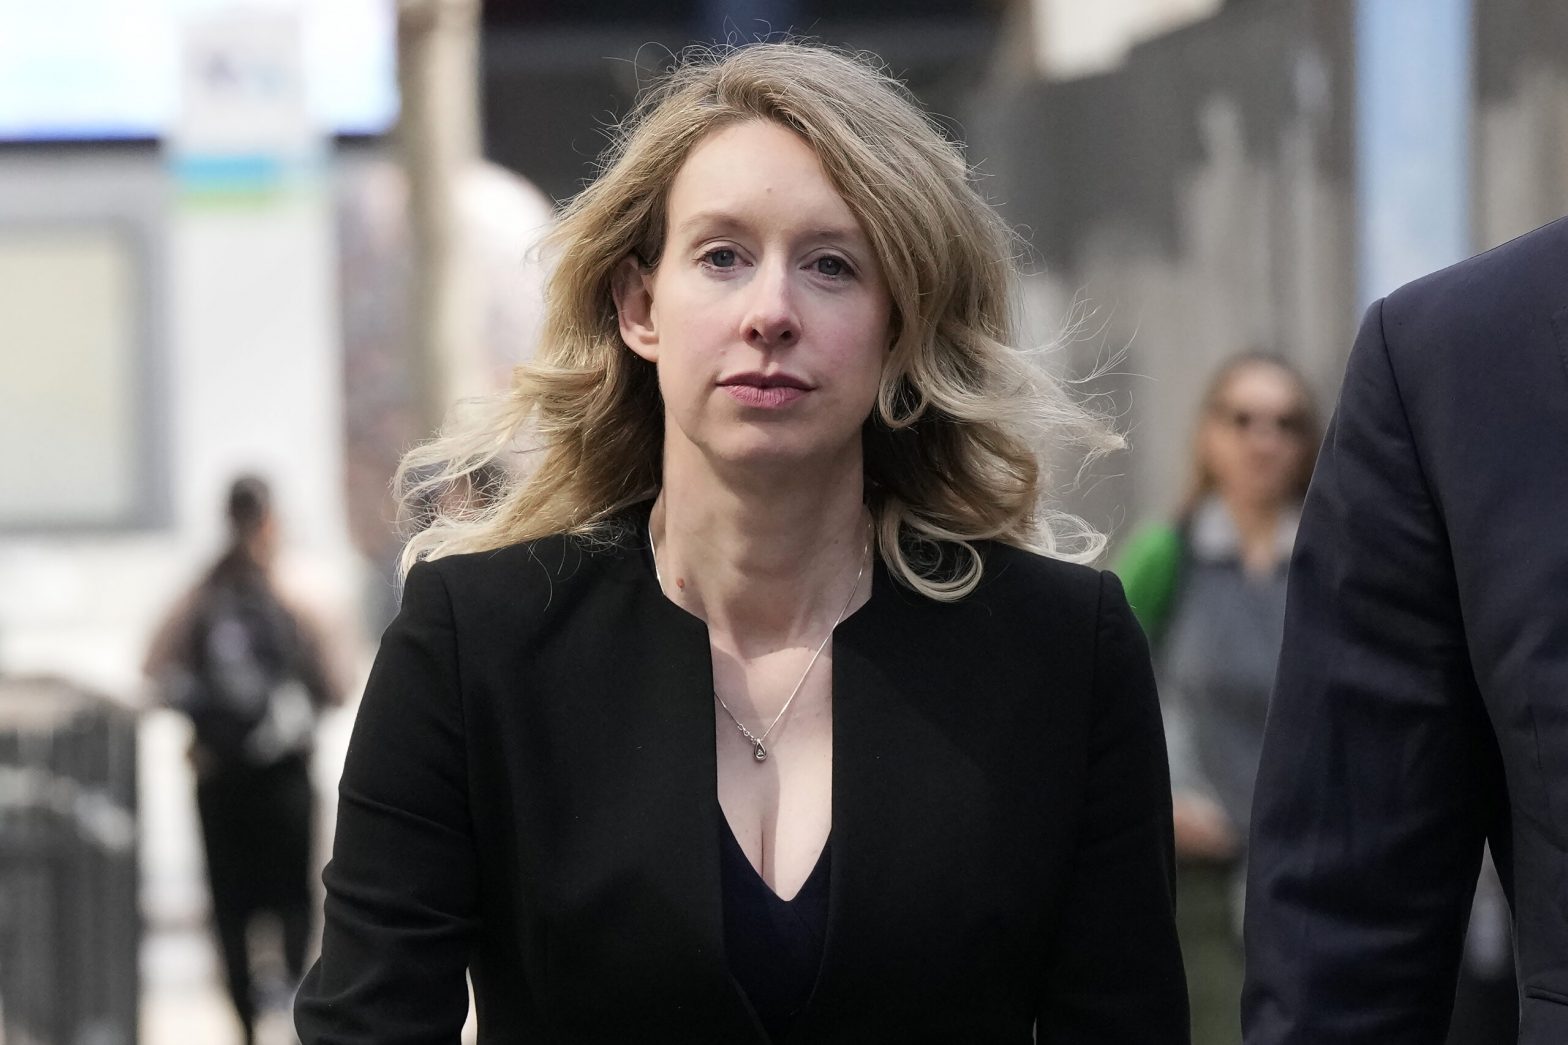 Elizabeth Holmes prison: What has court sentenced the Theranos founder?